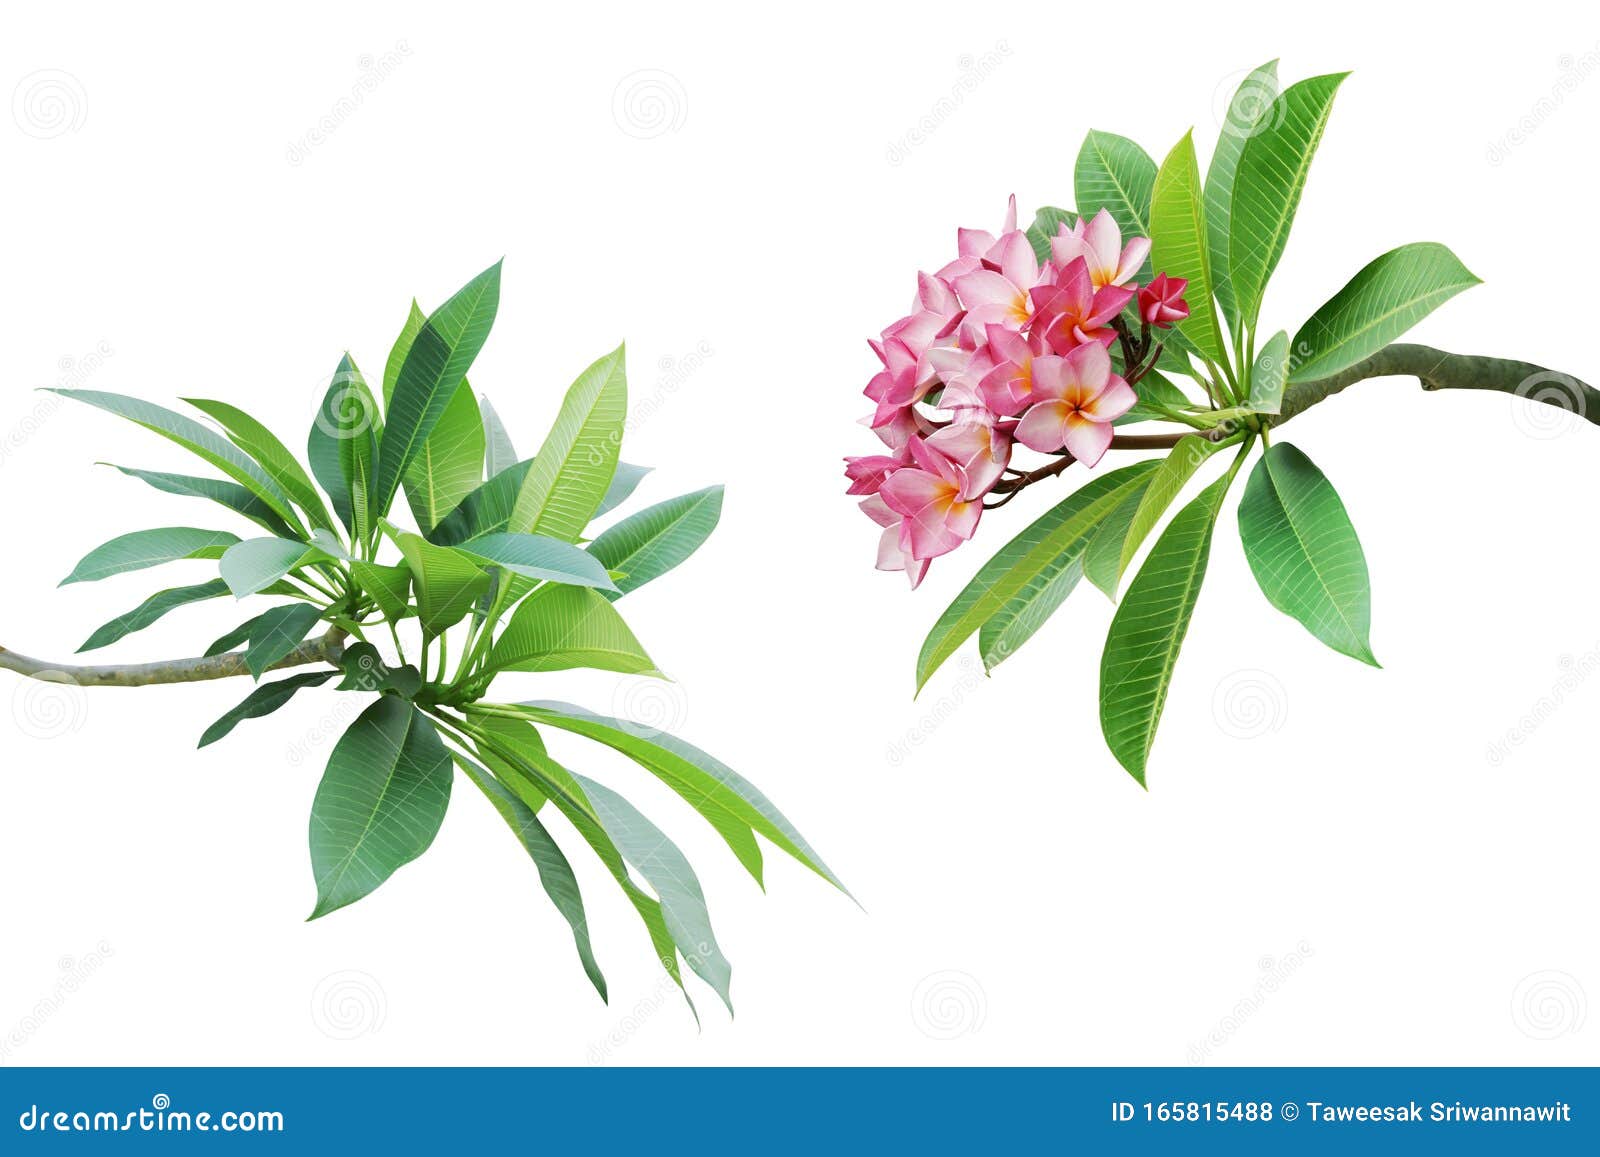 branches with green leaves and pink flowers of frangipani, plumeria tree  on white background with clipping path